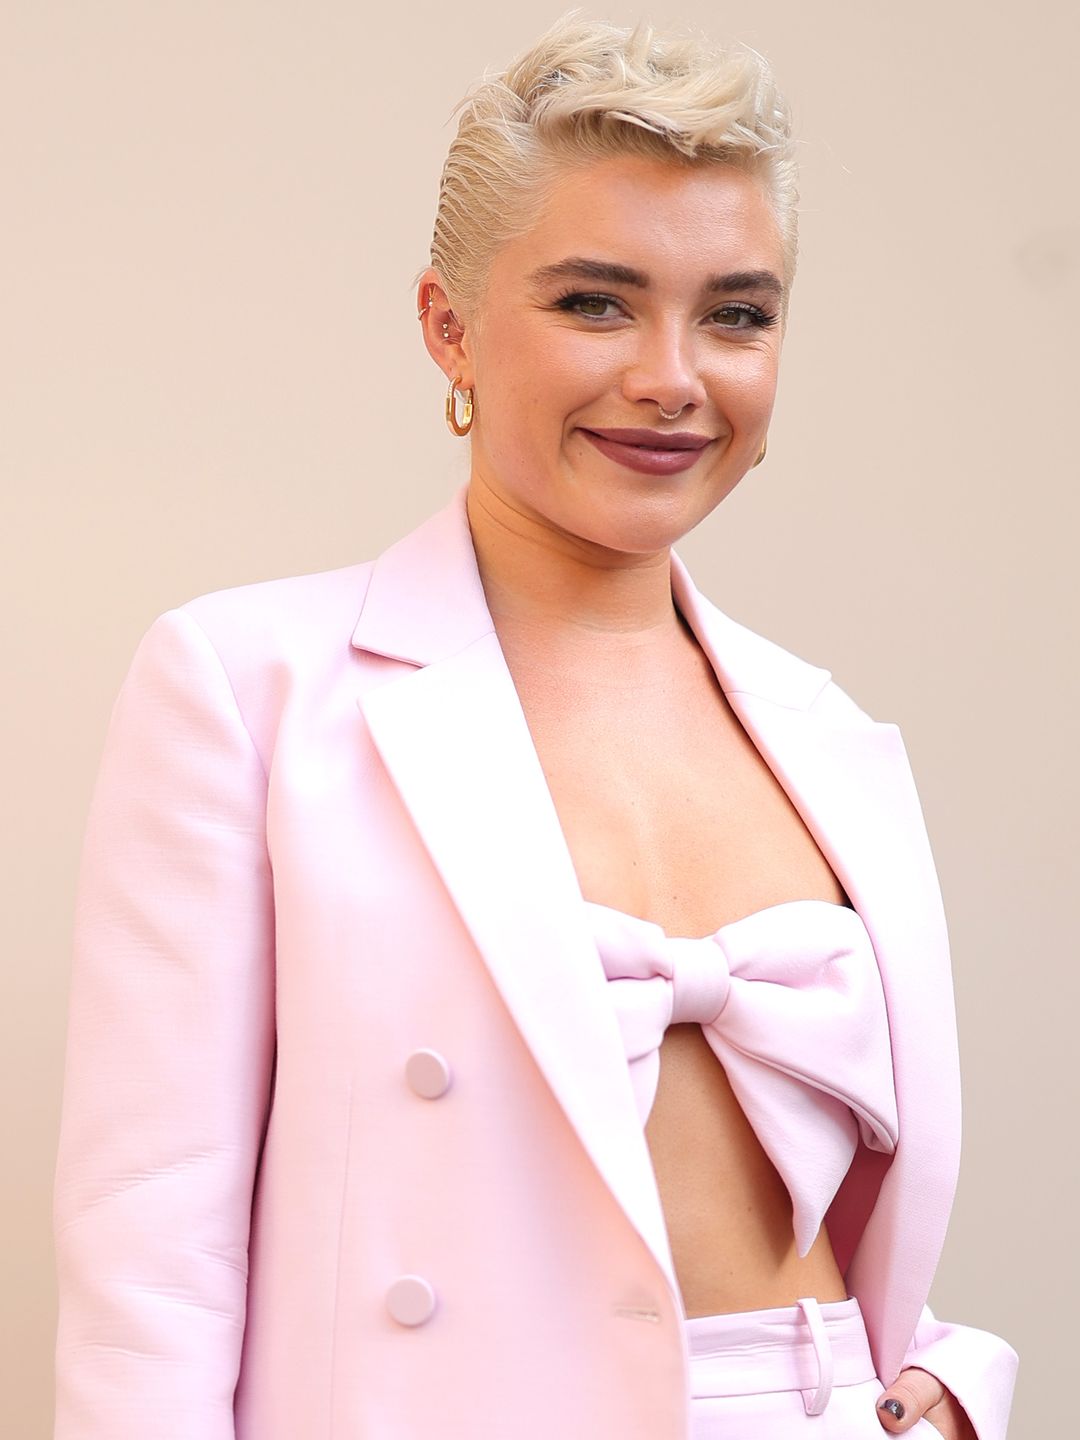 Style icon Florence Pugh is also a pixie cut fan